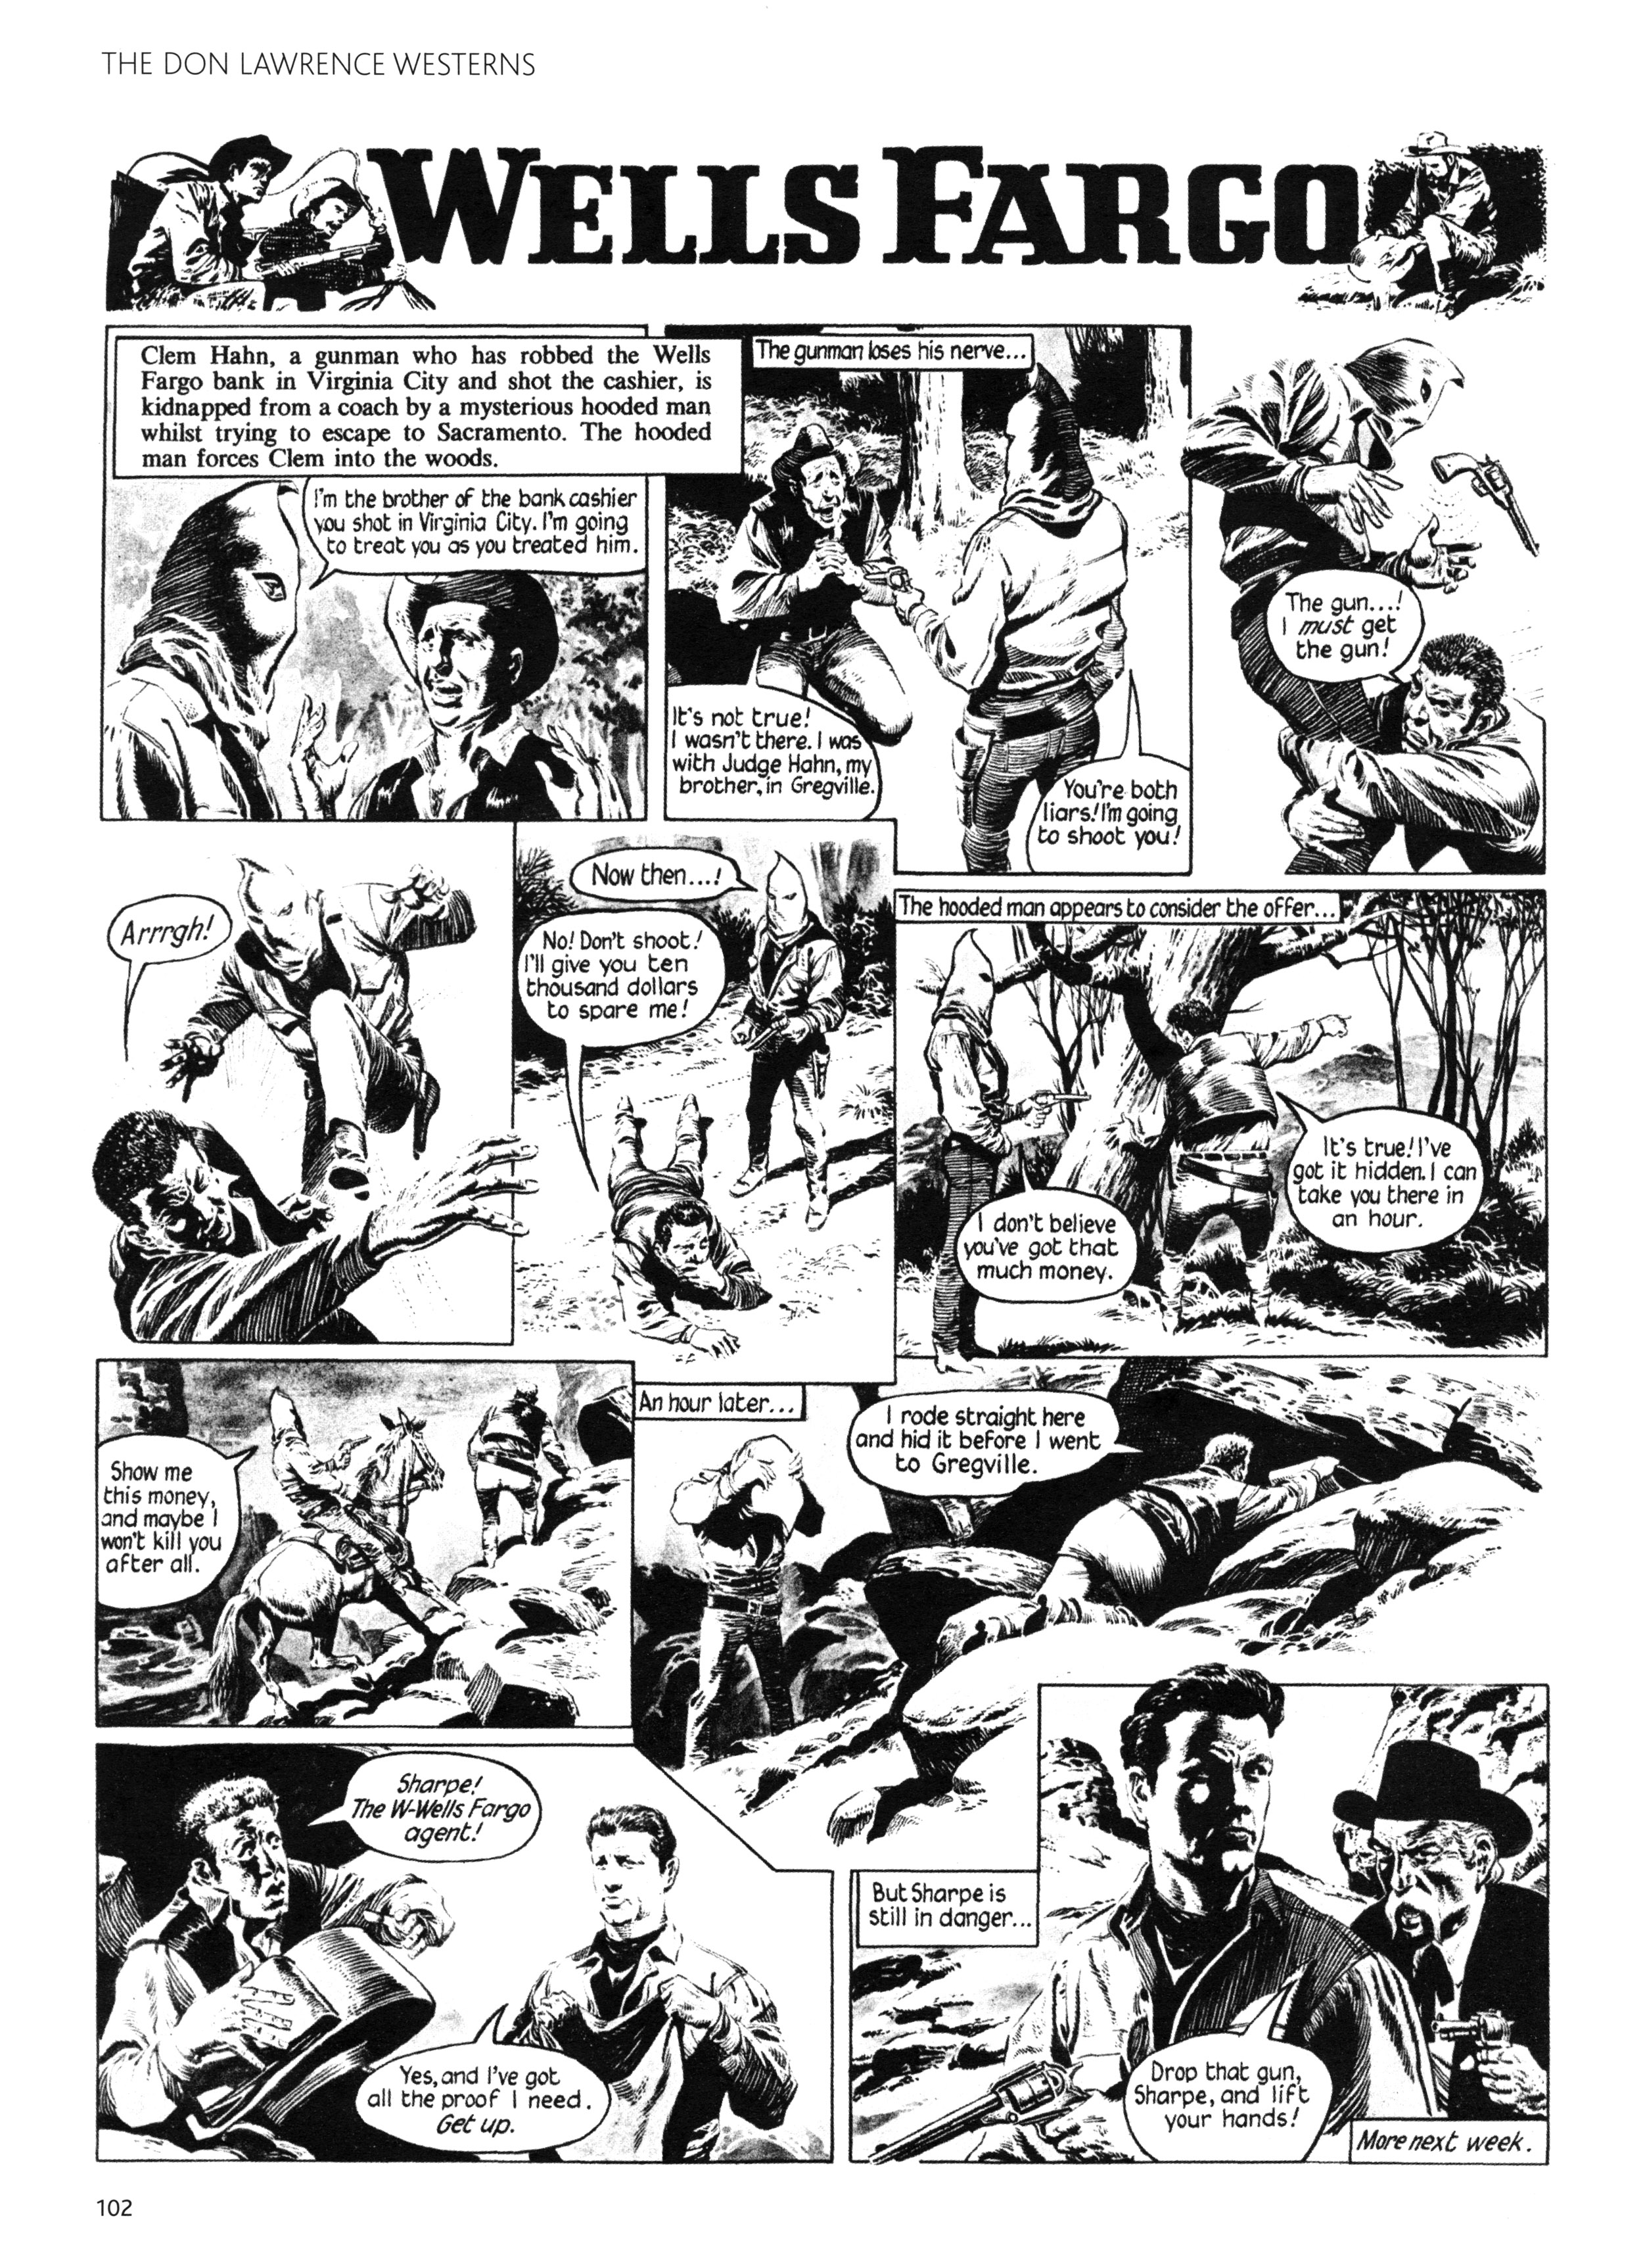 Read online Don Lawrence Westerns comic -  Issue # TPB (Part 2) - 3